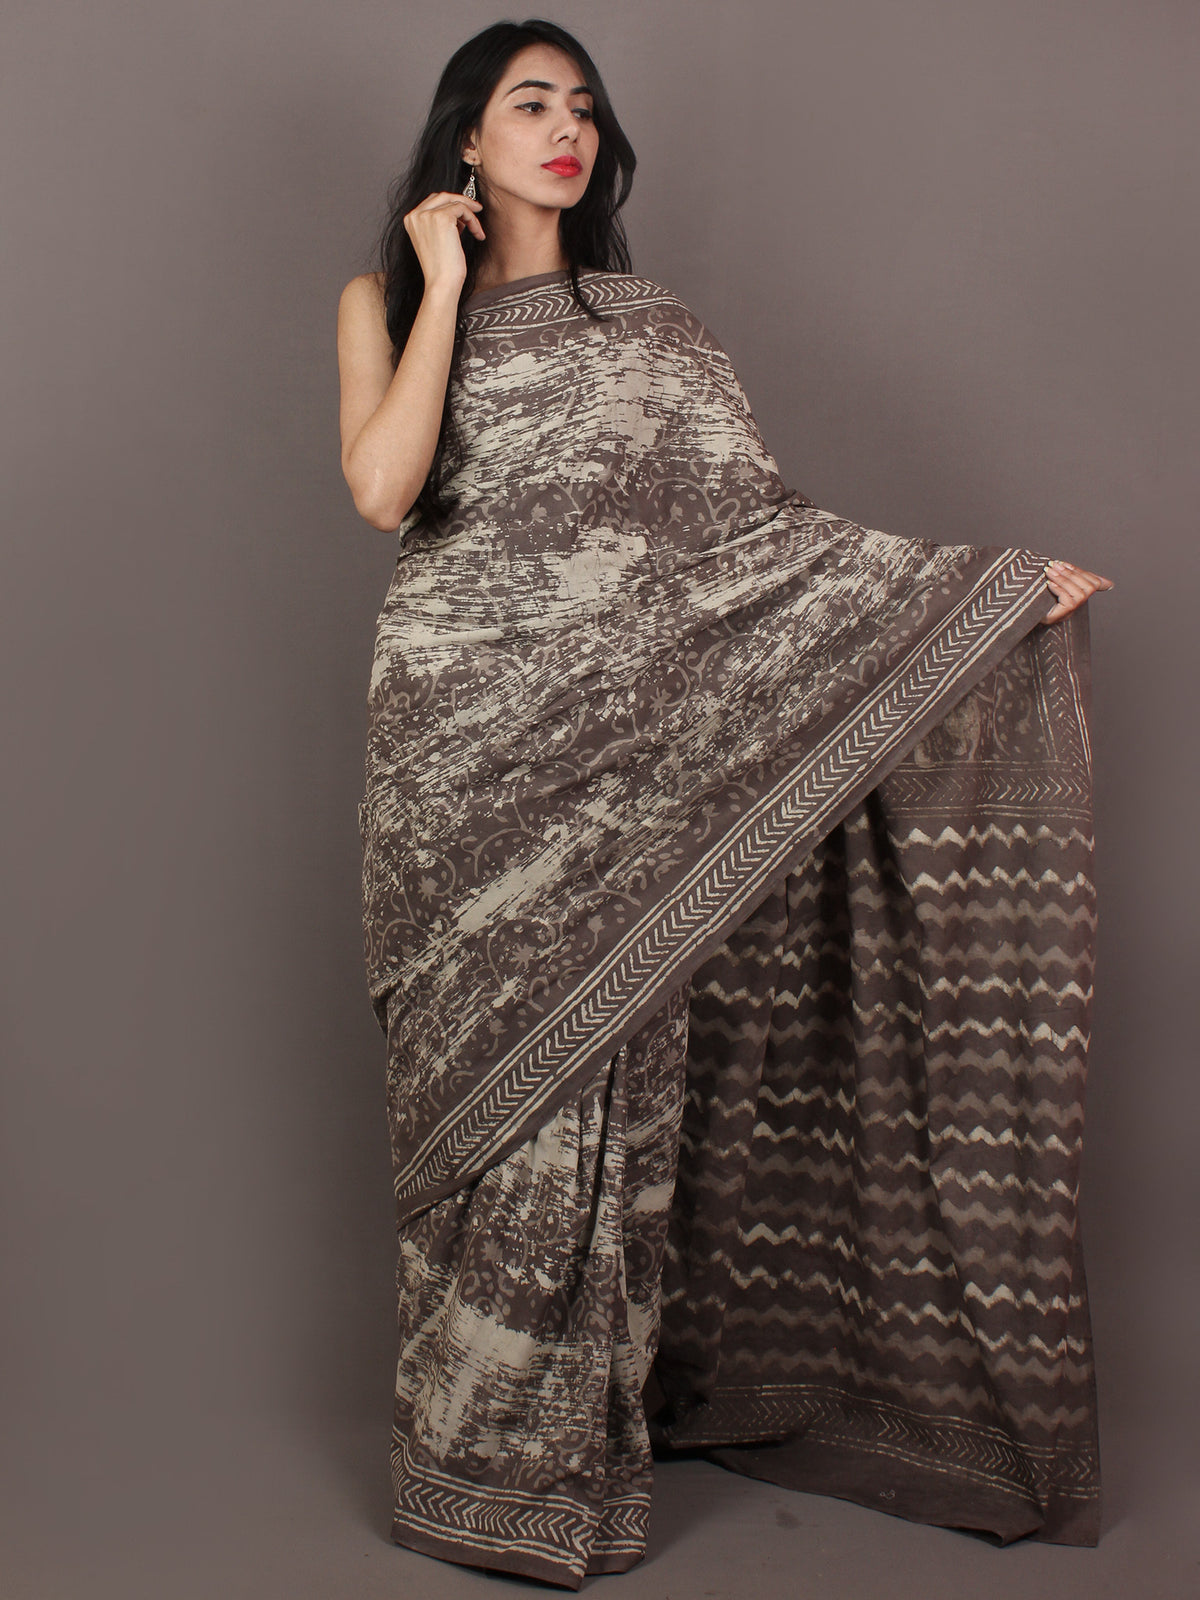 Cedar Brown Ivory Hand Block Printed & Hand Painted in Natural Colors Cotton Mul Saree - S031701091